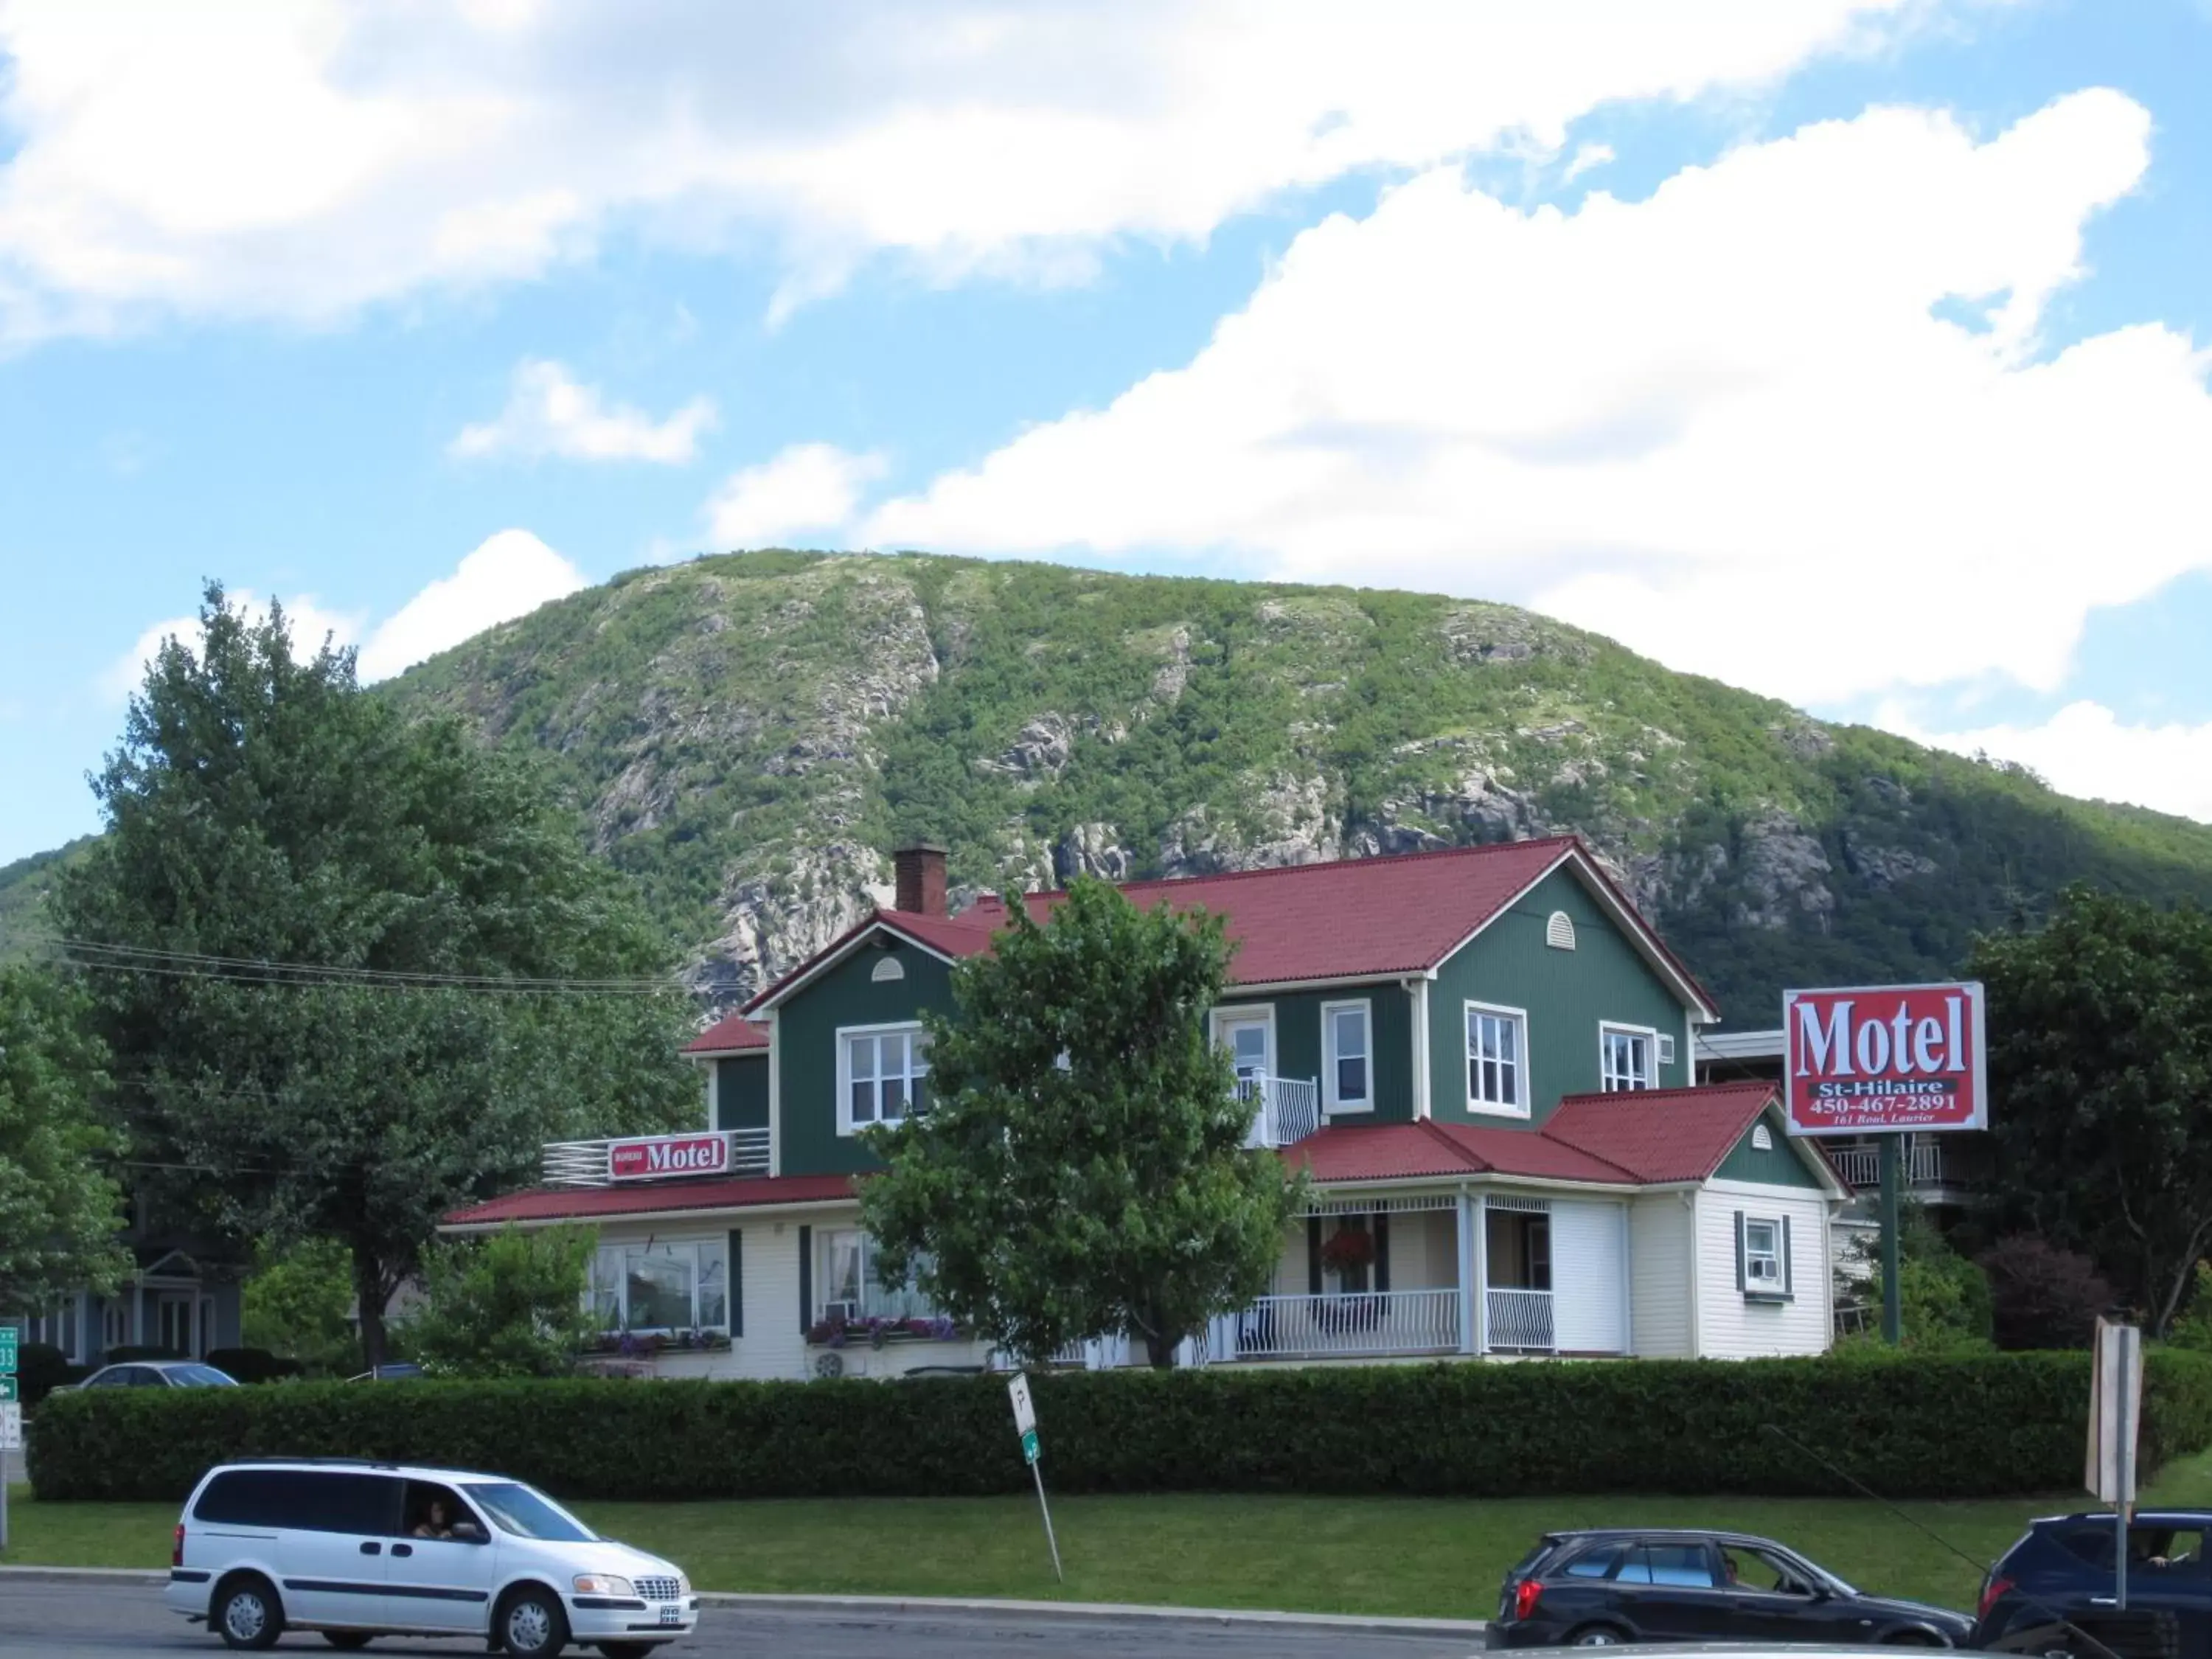 Nearby landmark, Property Building in Motel Saint-Hilaire